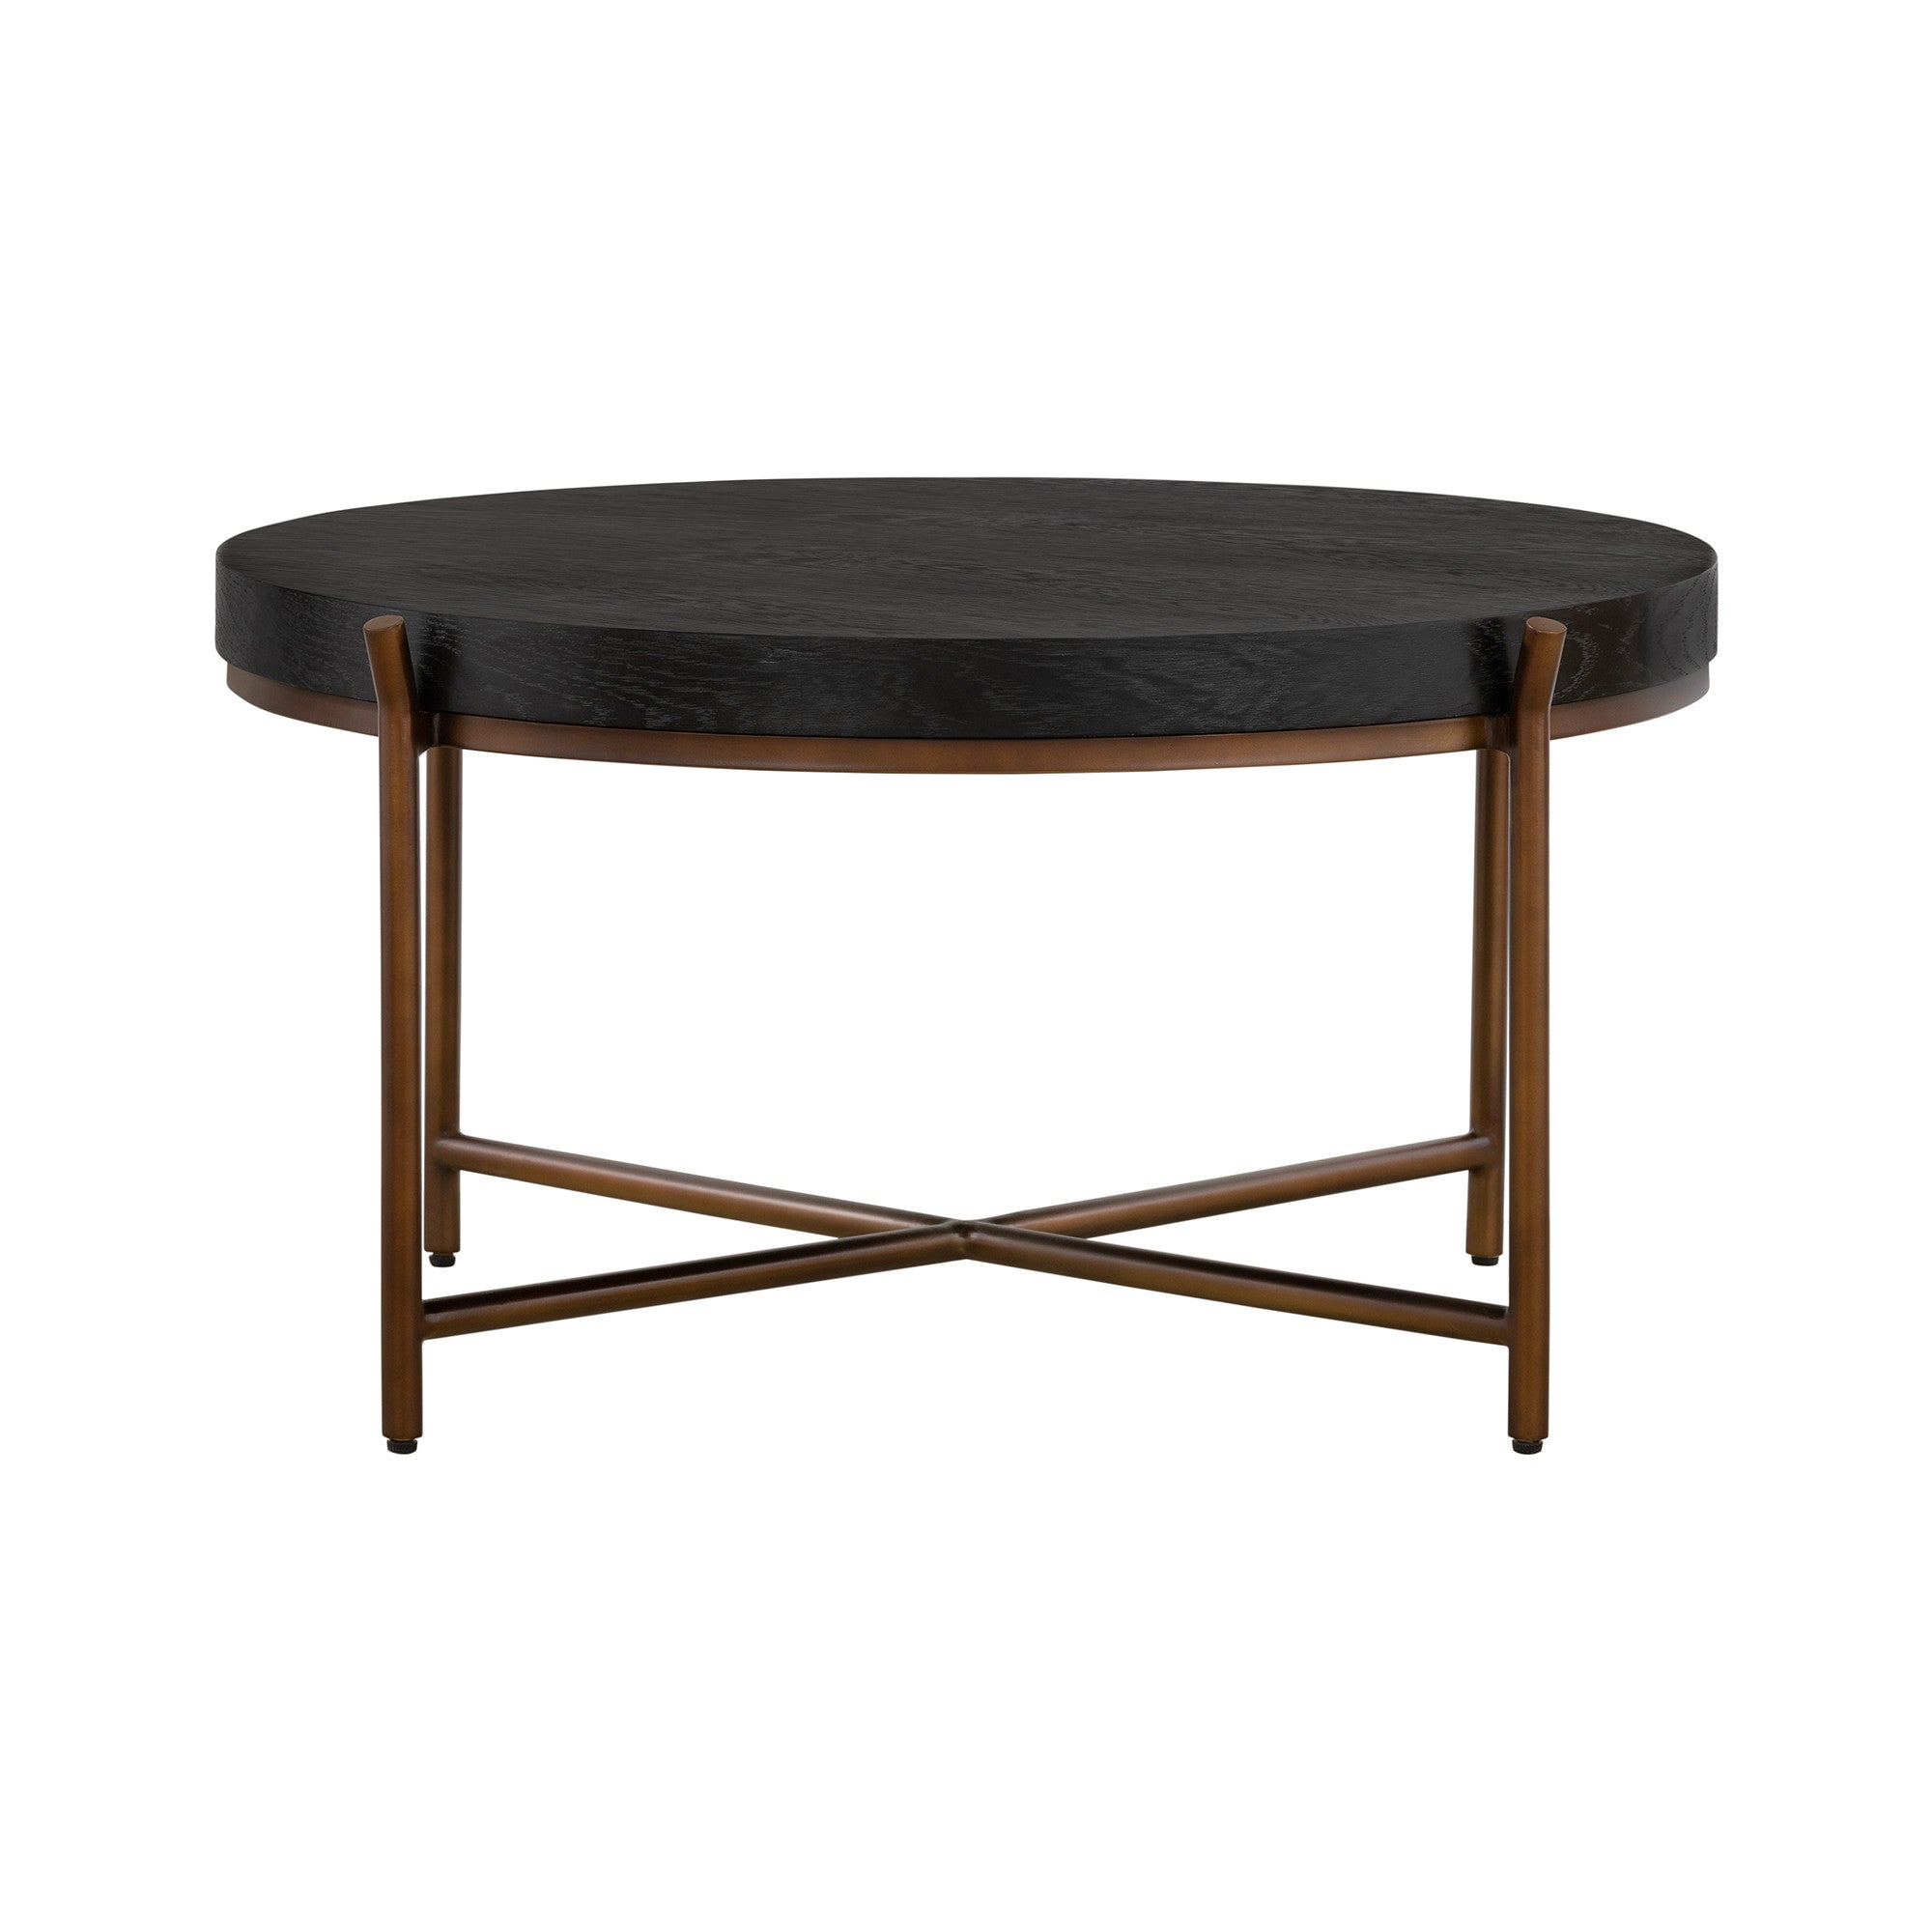 32" Black And Brown Solid Wood And Metal Round Coffee Table